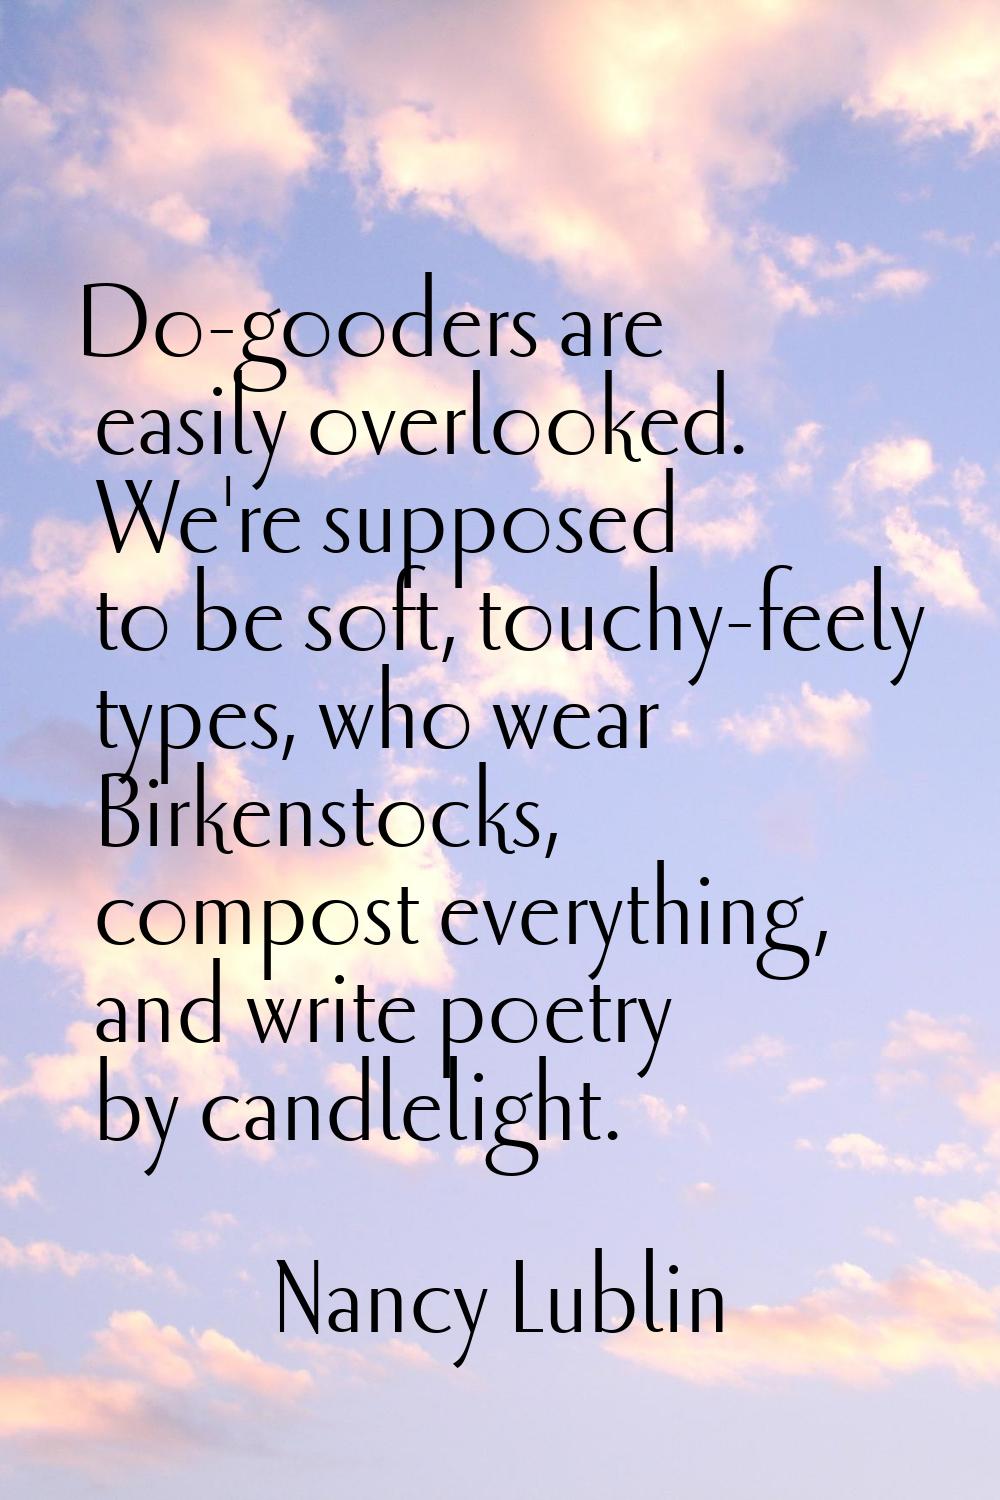 Do-gooders are easily overlooked. We're supposed to be soft, touchy-feely types, who wear Birkensto